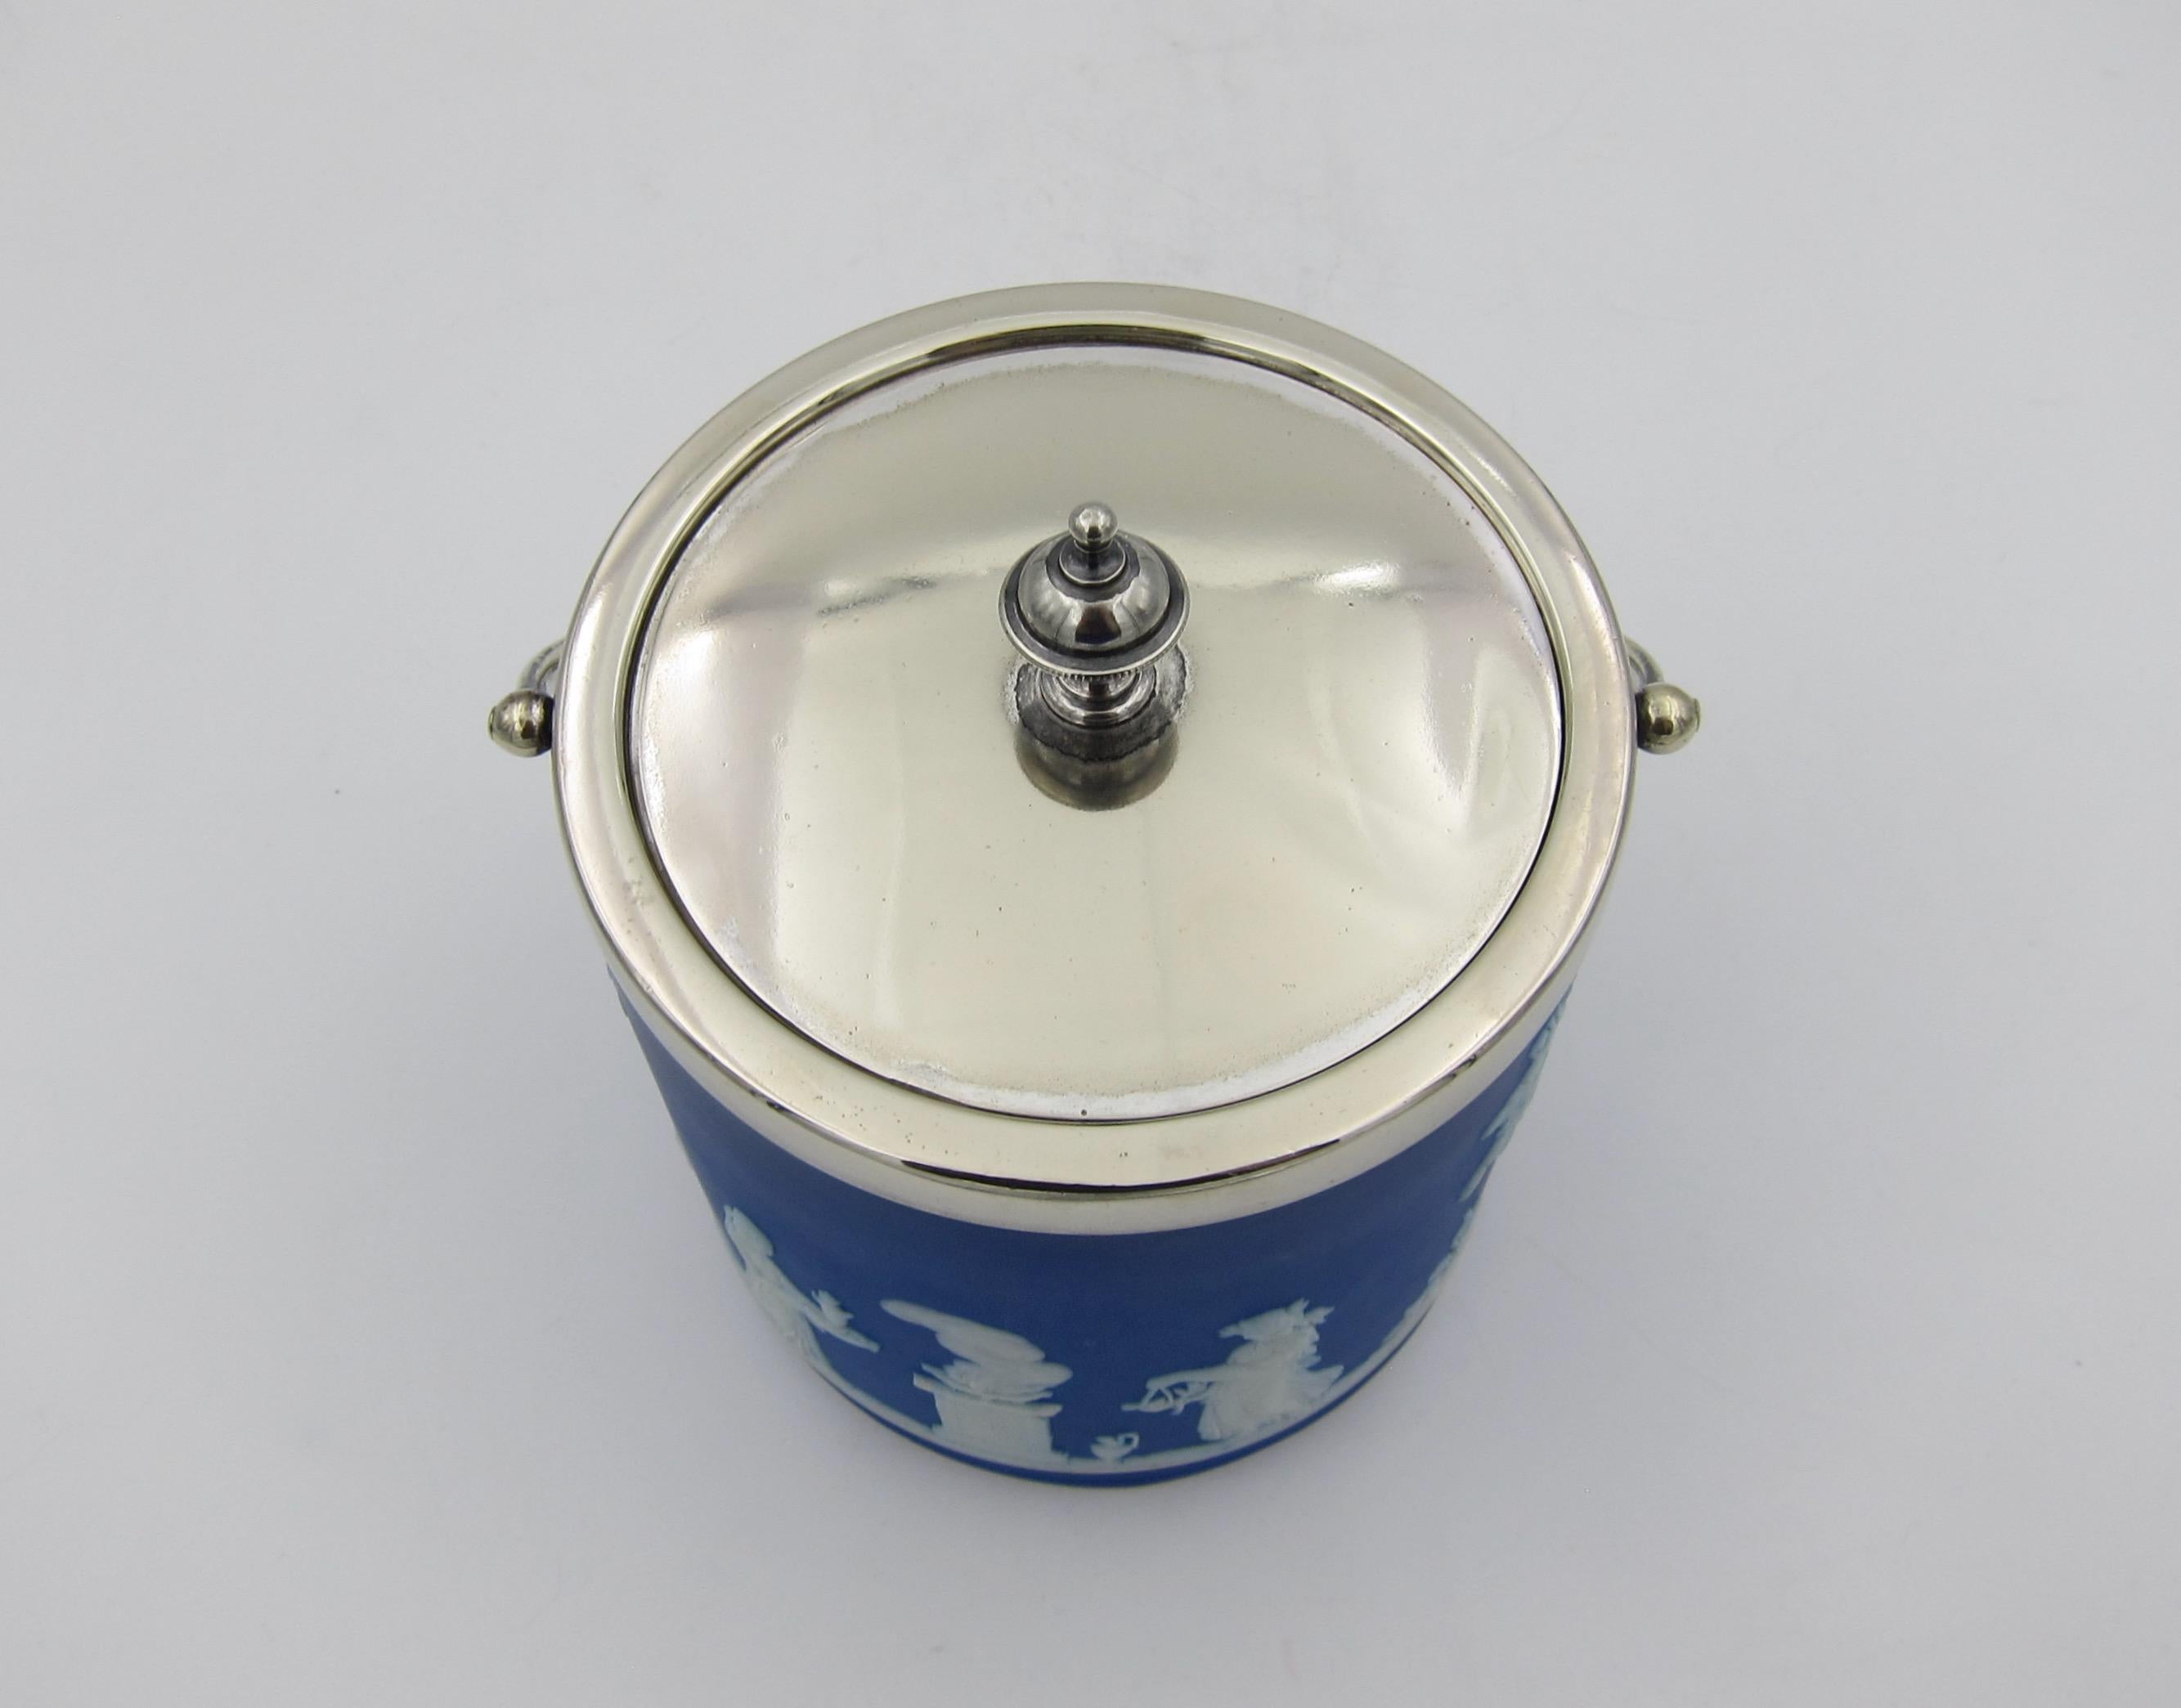 19th Century Antique Wedgwood Biscuit Jar in Blue Jasper with Silver-Plated Fittings